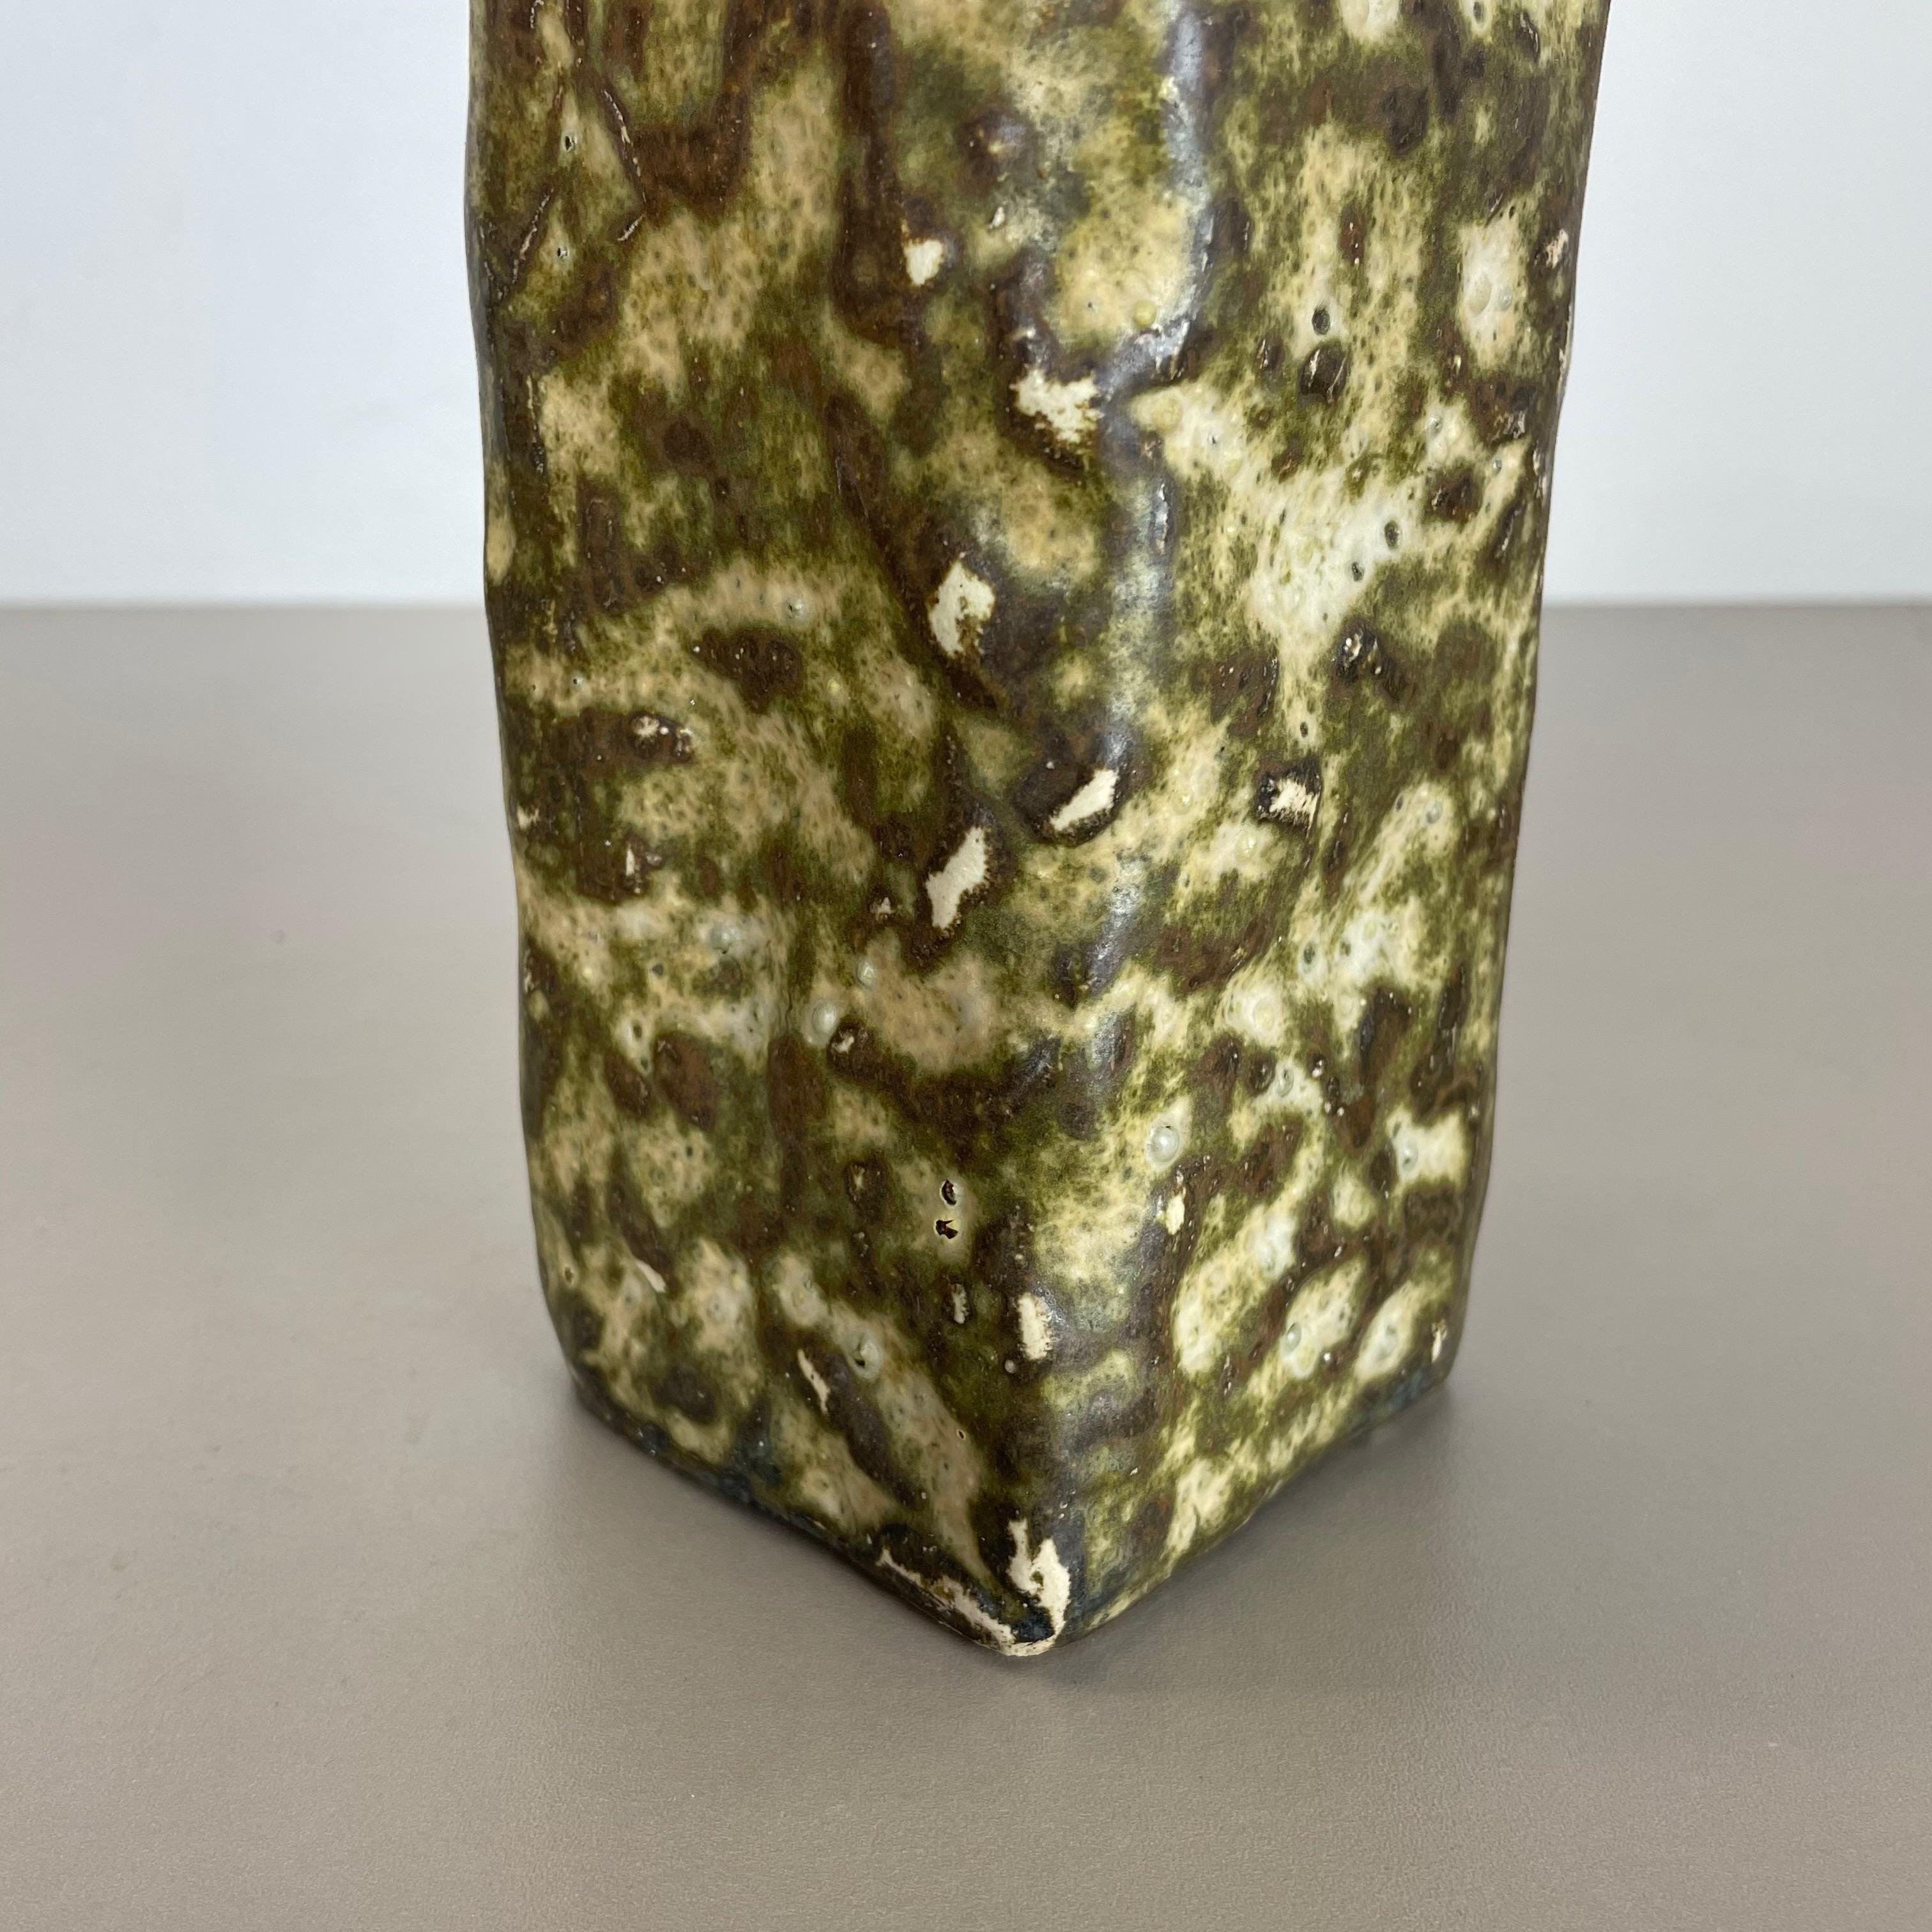 Original 1960 Ceramic Studio Pottery Vase by Piet Knepper for Mobach Netherlands In Good Condition For Sale In Kirchlengern, DE